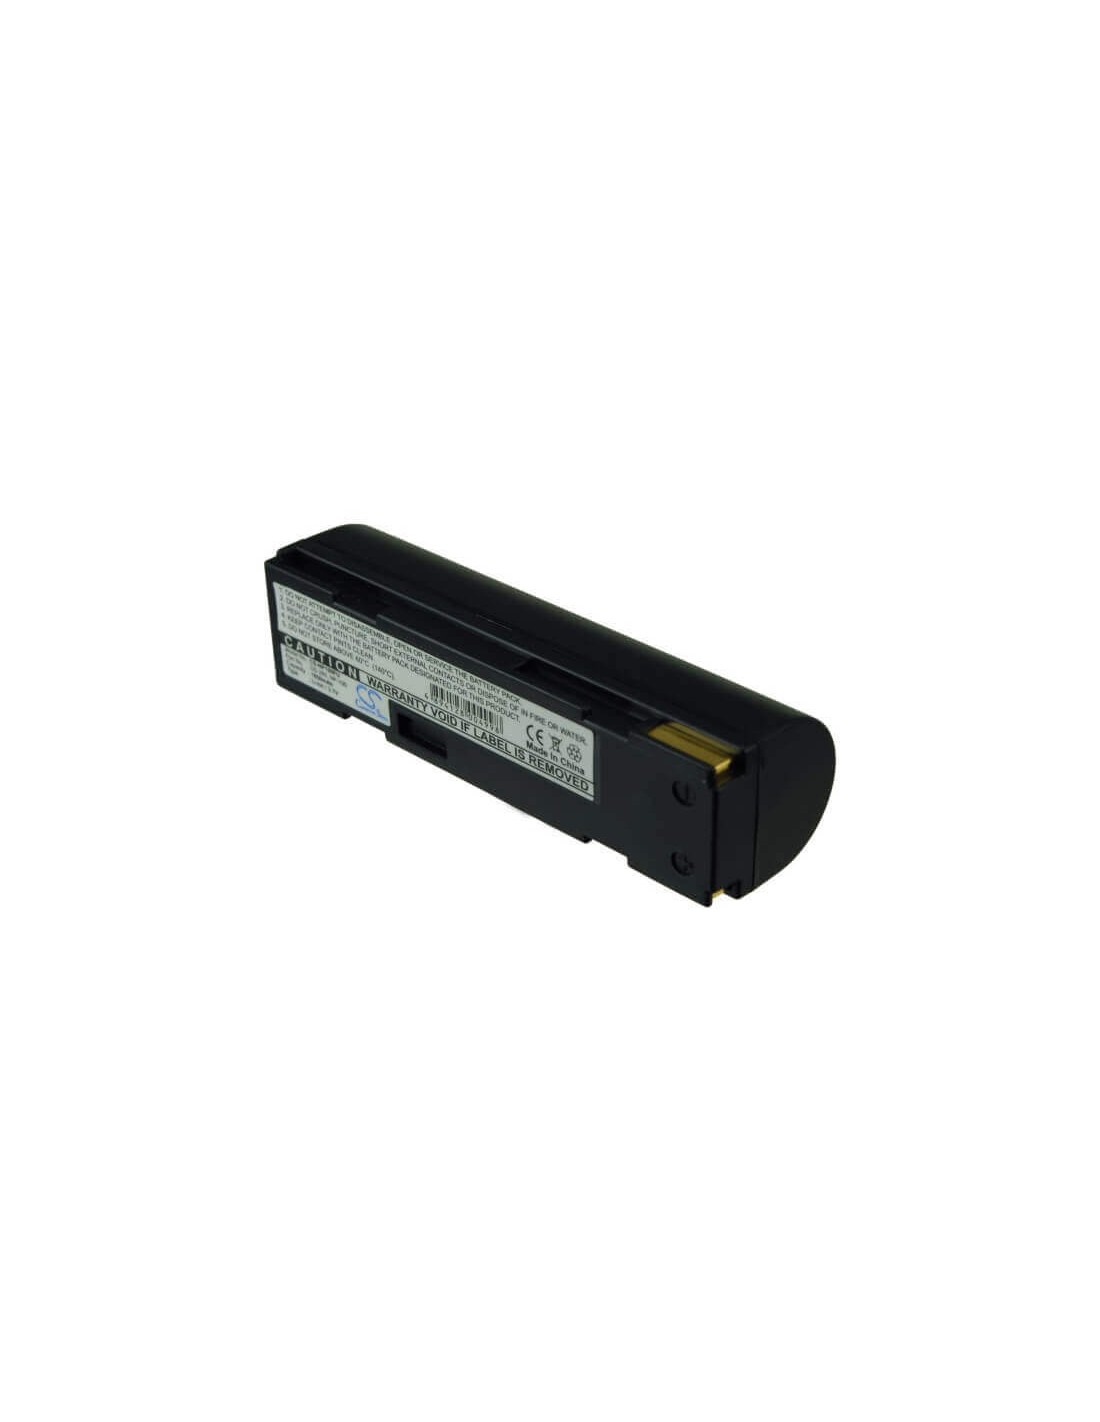 Battery for Fujifilm Ds260, Dx-9, Finepix Mx-600, 3.7V, 1850mAh - 6.85Wh